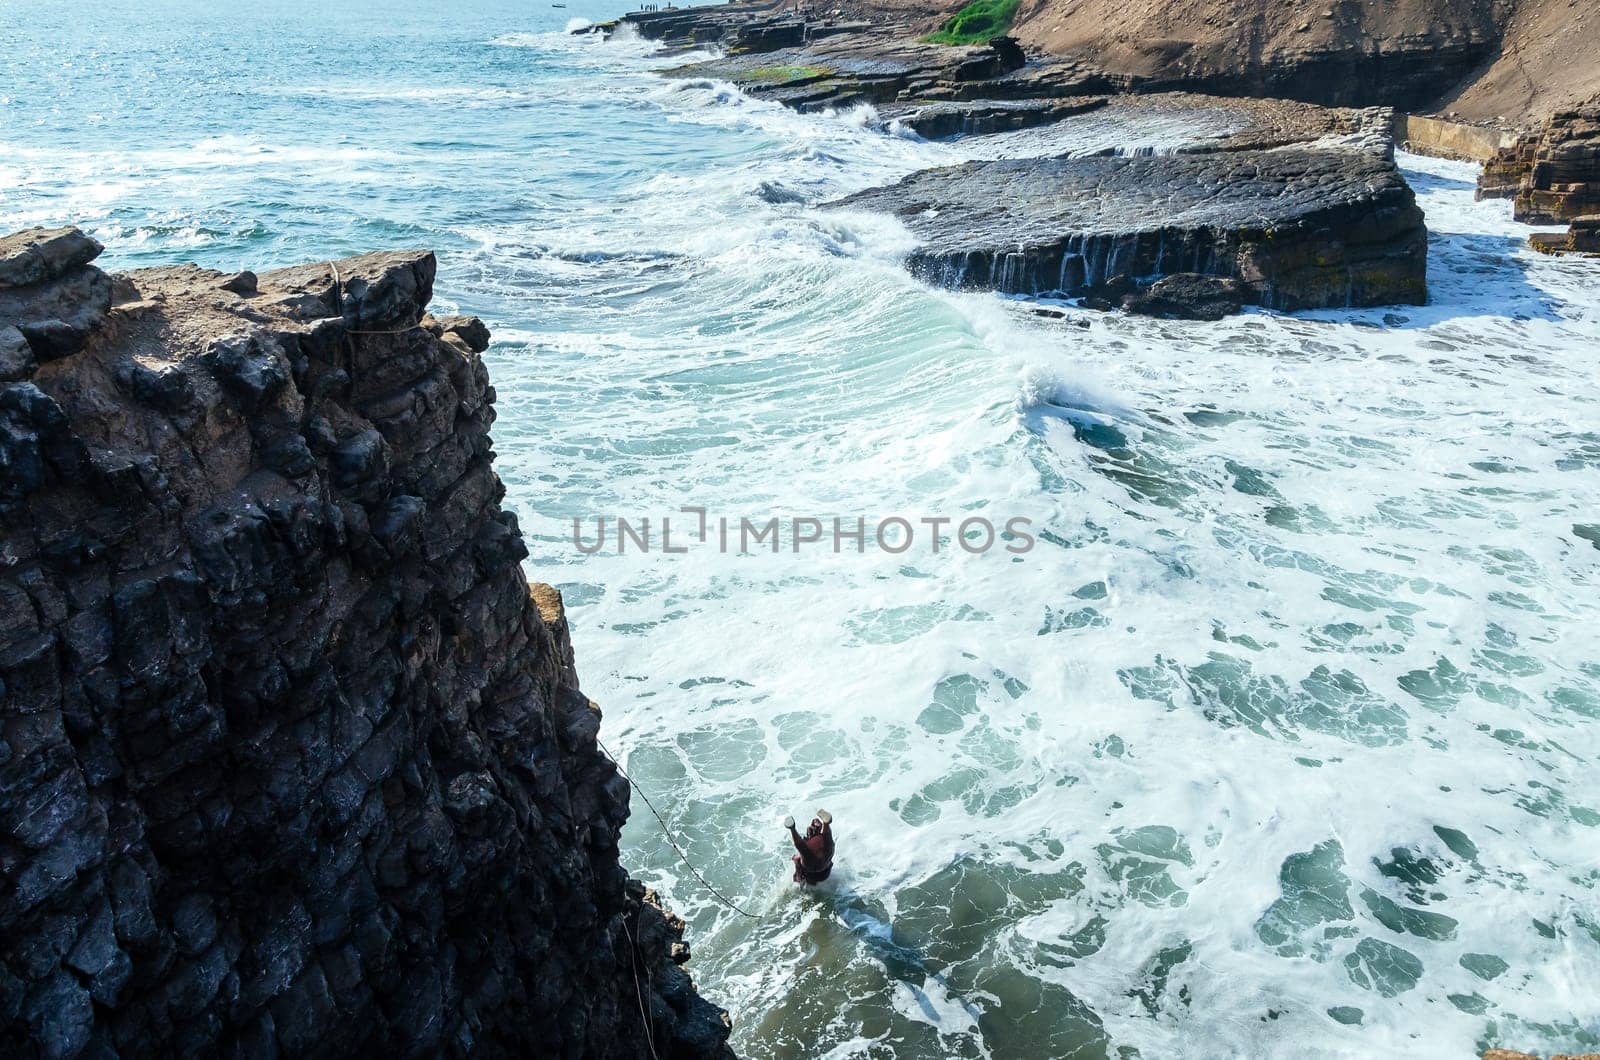 Man dressed as a friar throws himself off a cliff and head into the ocean at sunset